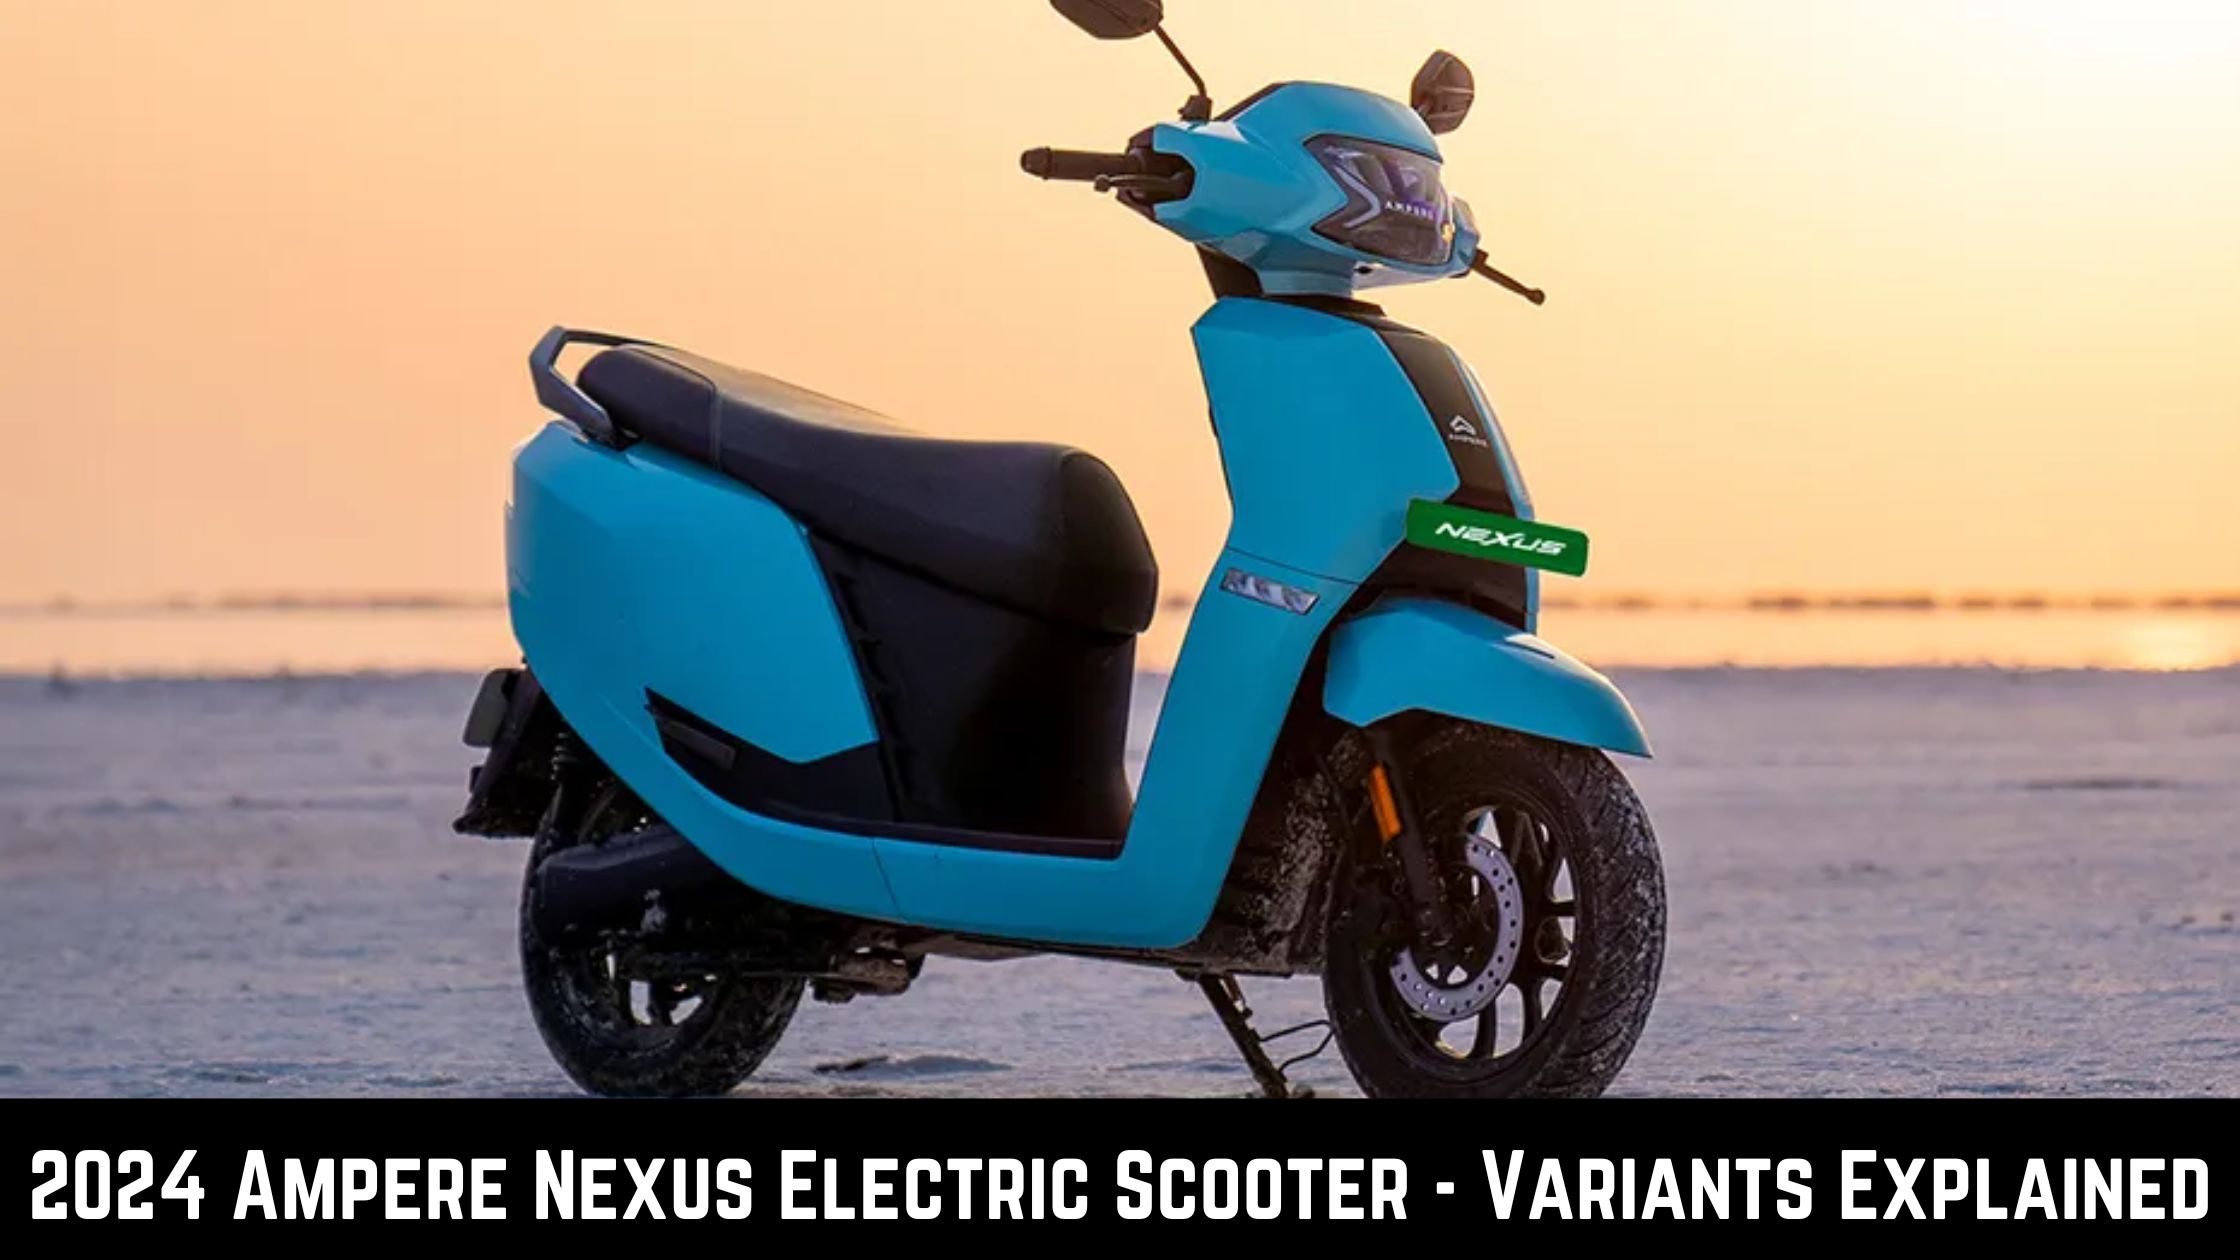 2024 Ampere Nexus Electric Scooter - Variants Explained